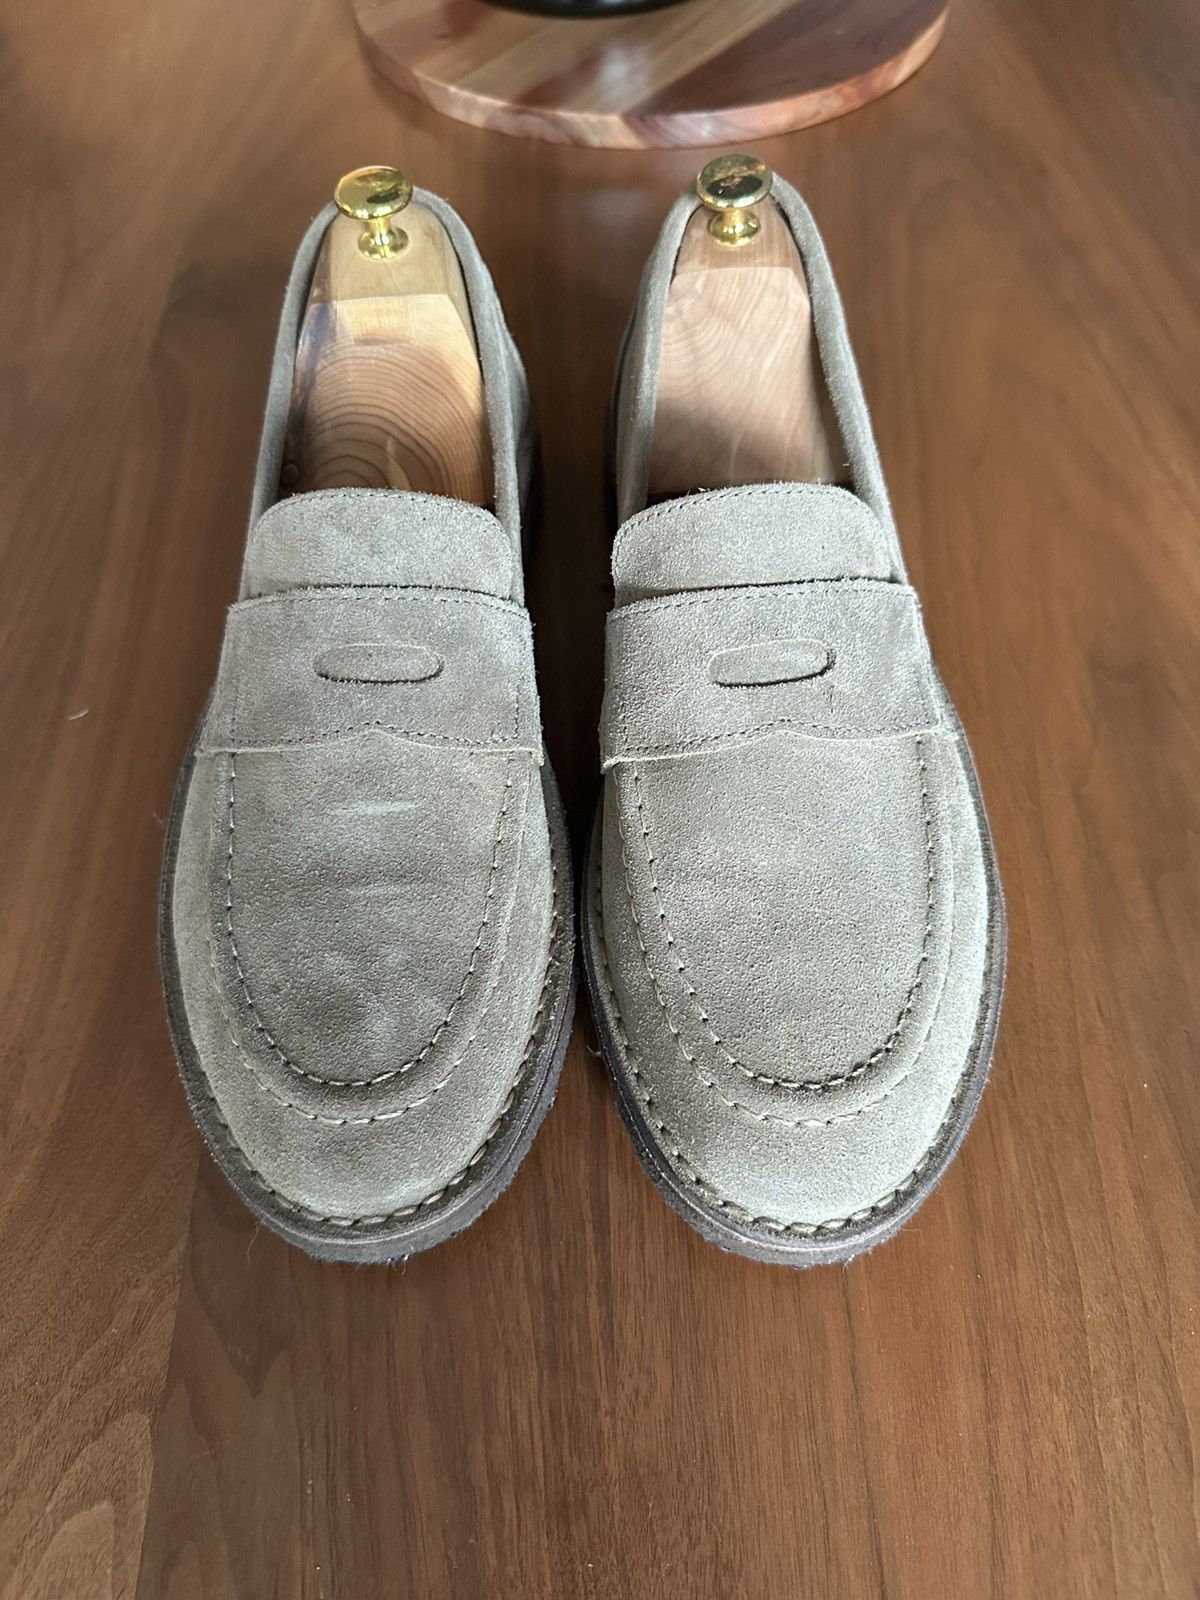 Drakes Drakes Canal St. Crepe Sole Penny Loafer | Grailed